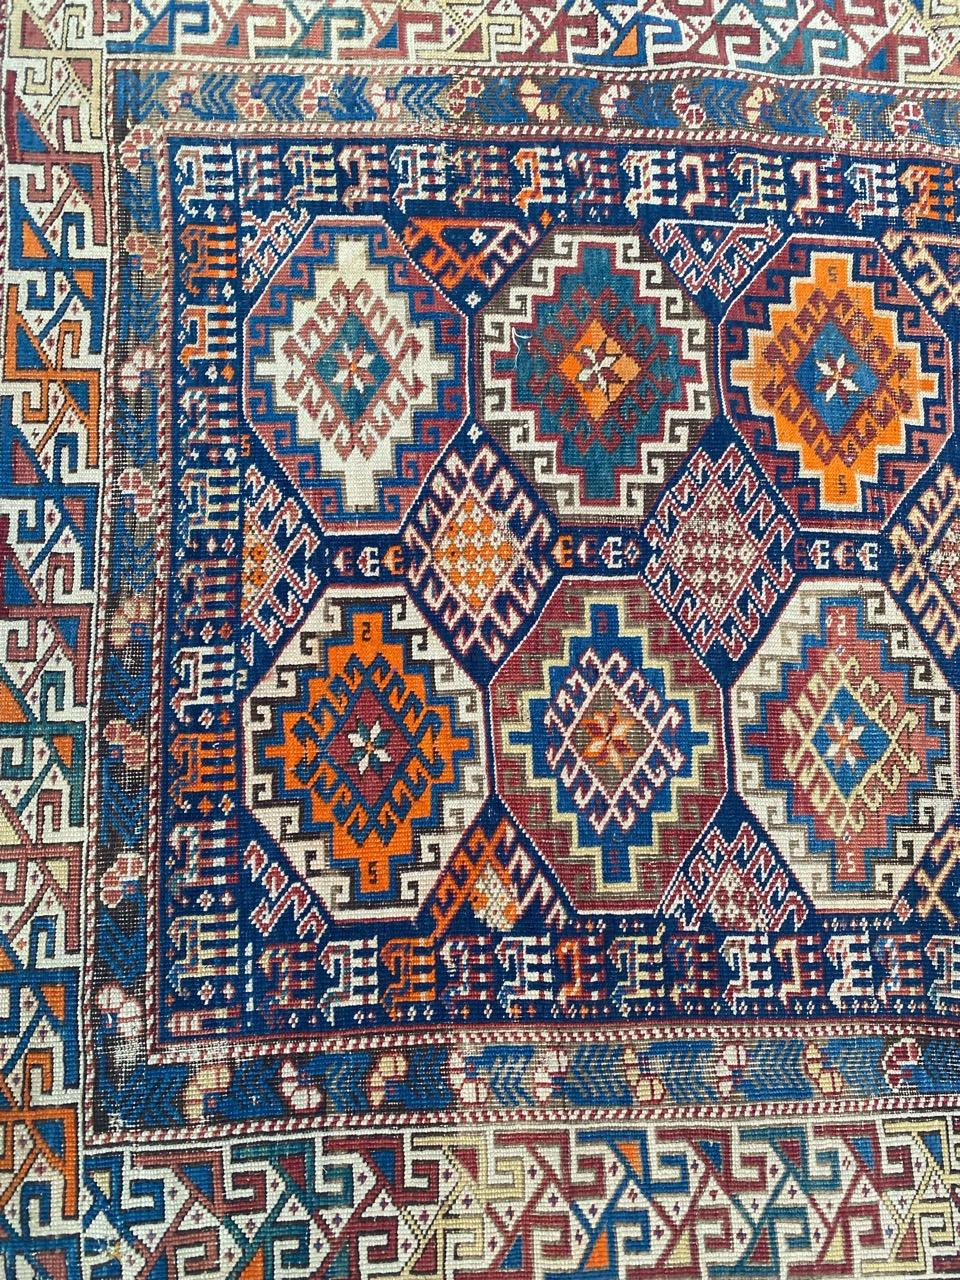 Exquisite late 19th-century Caucasian rug featuring a stunning Moghan design with intricate geometric patterns. Hand-knotted with wool velvet on a wool foundation, this masterpiece boasts natural colors. Against a navy blue backdrop, stylized